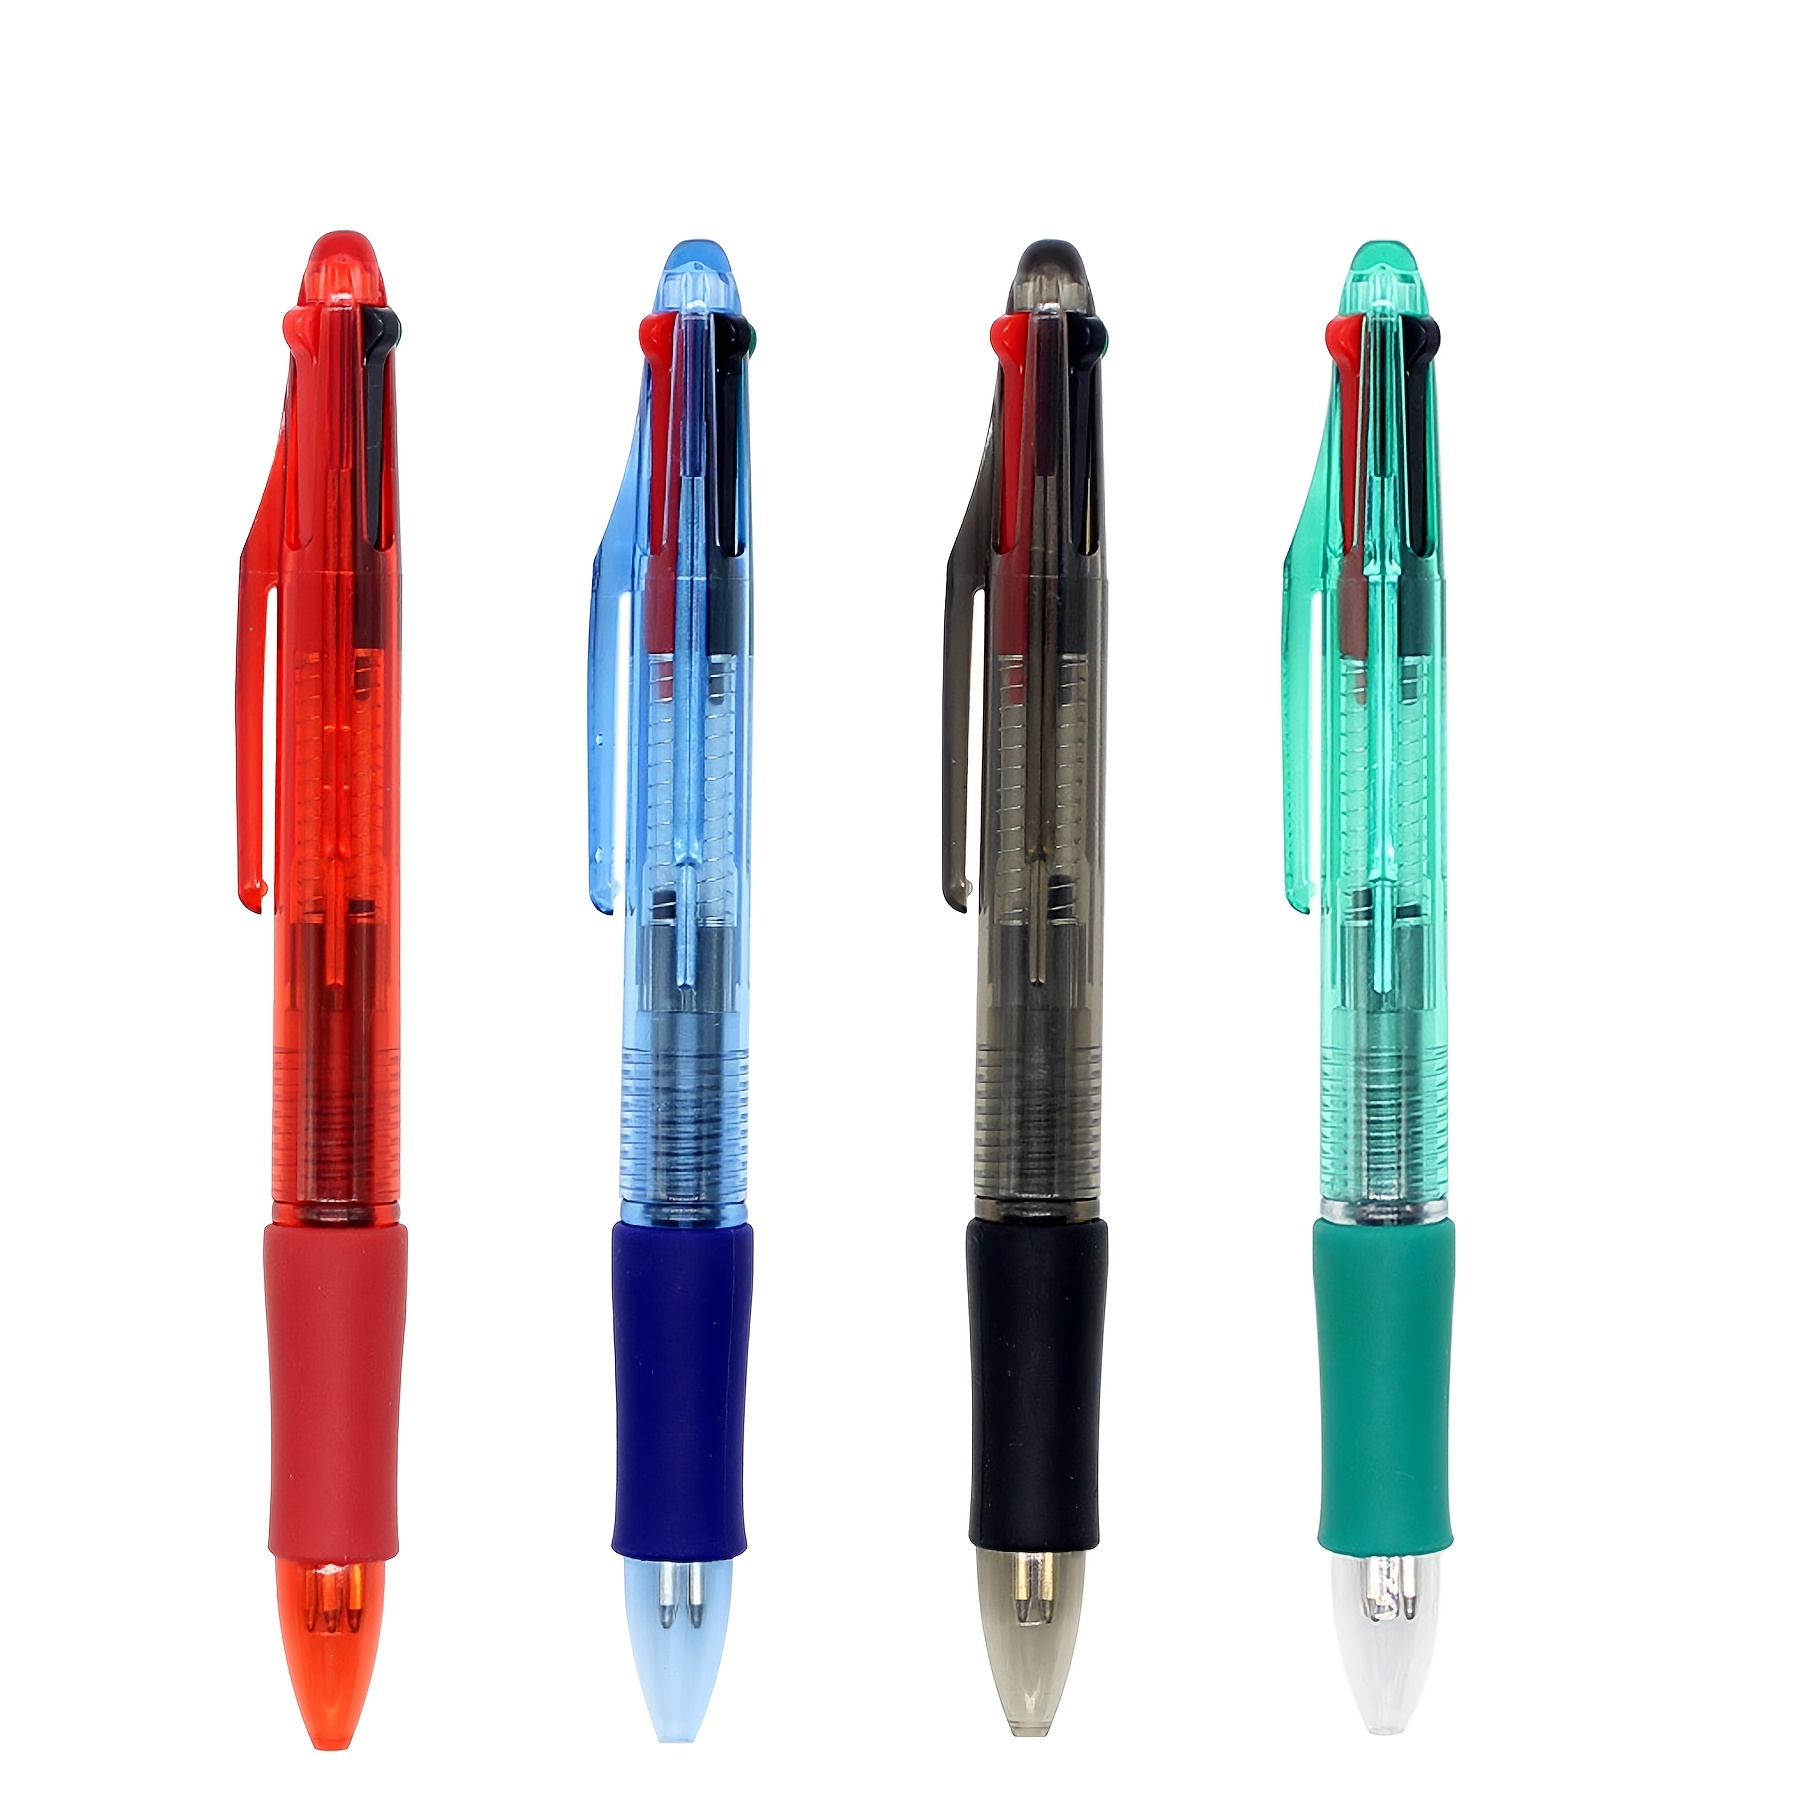 Reopen 4 in 1 Multicolor Pen, Portable Metal Cased Multifunctional Refillable&Retractable Ballpoint Pen with Gift Box, Mechanical Pencil, Black Red